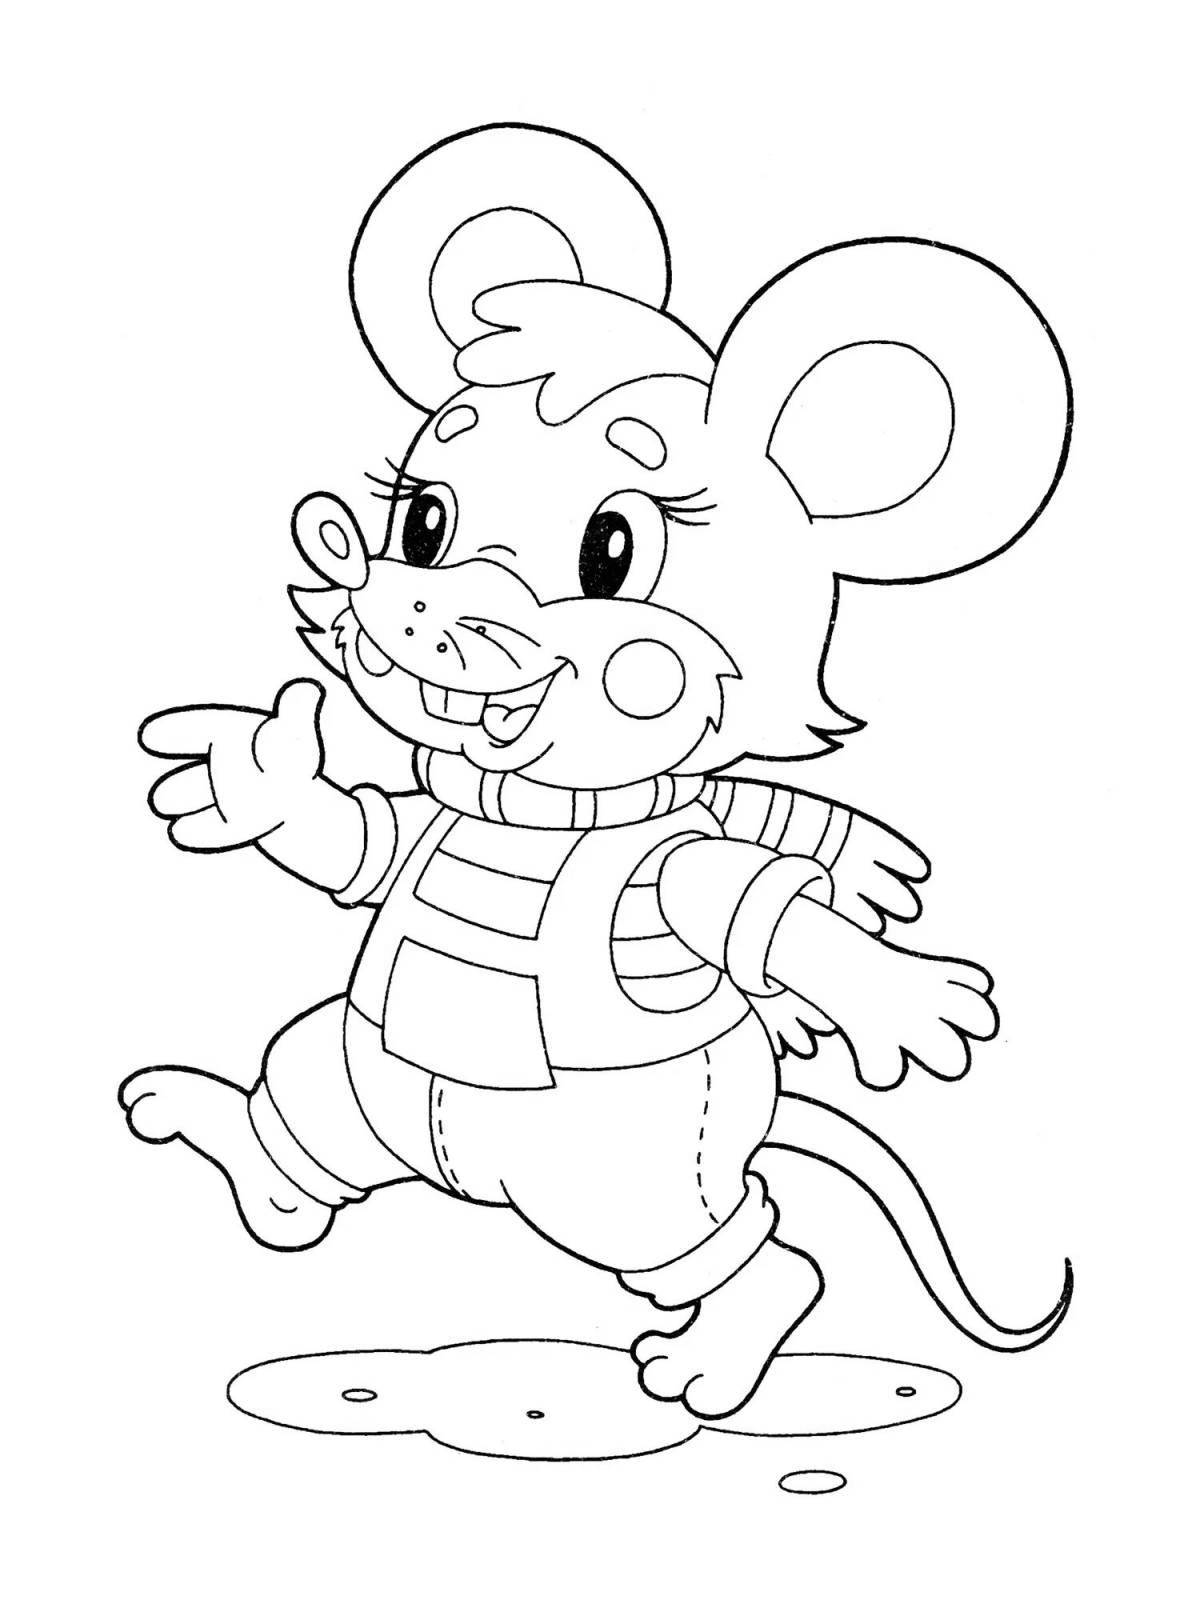 Naughty mouse and bear coloring book